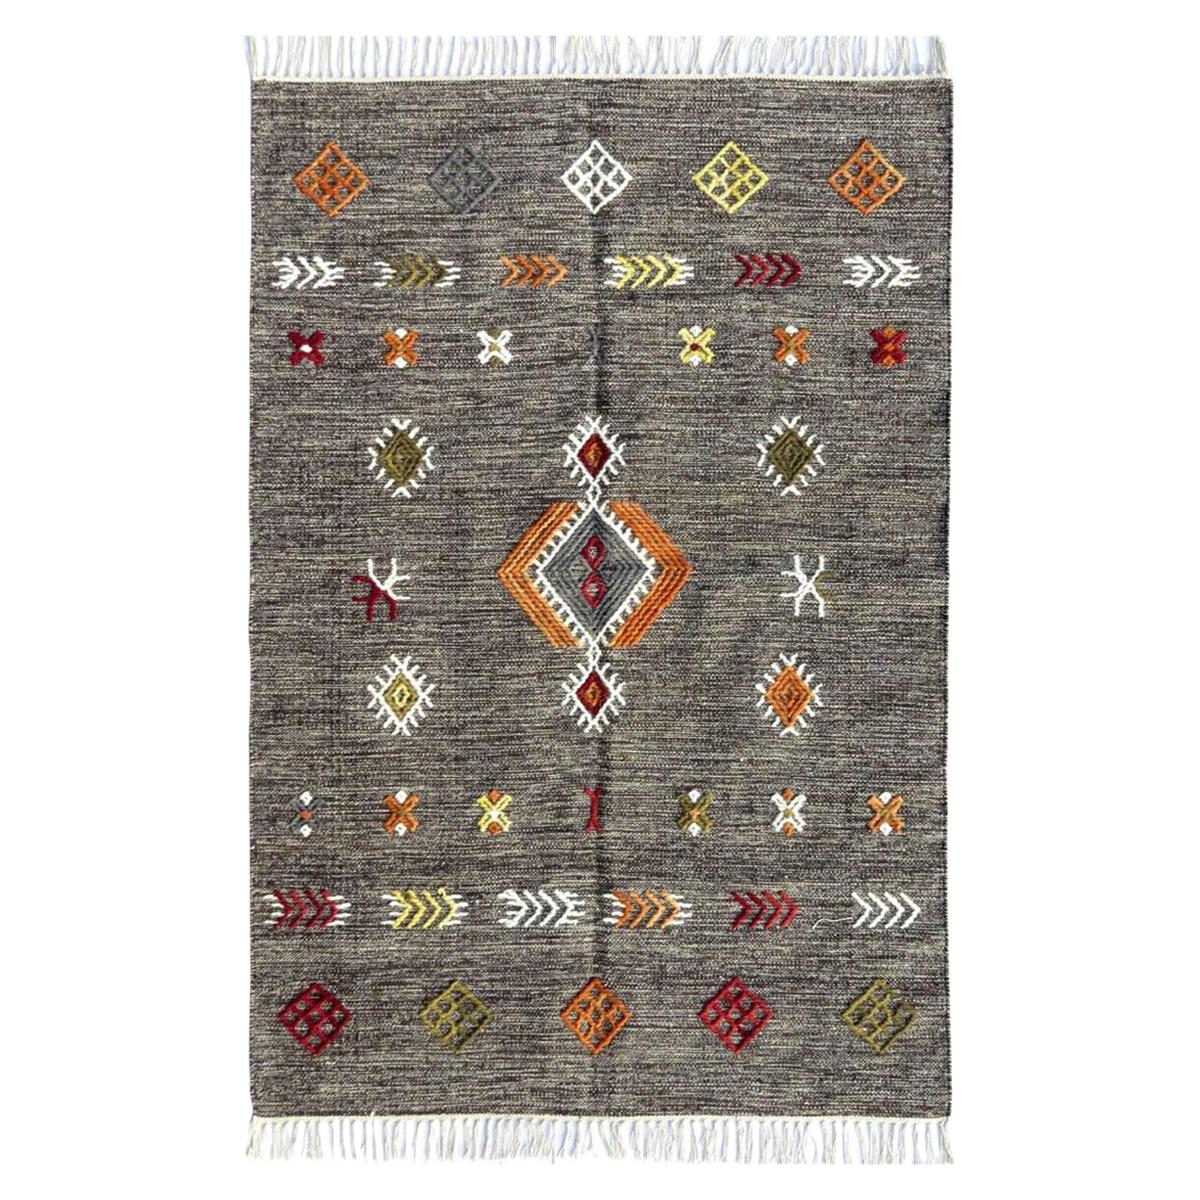 Beautiful New Tribal Moroccan Design Handwoven Kilim Rug size 6ft 6in x 9ft 10in For Sale